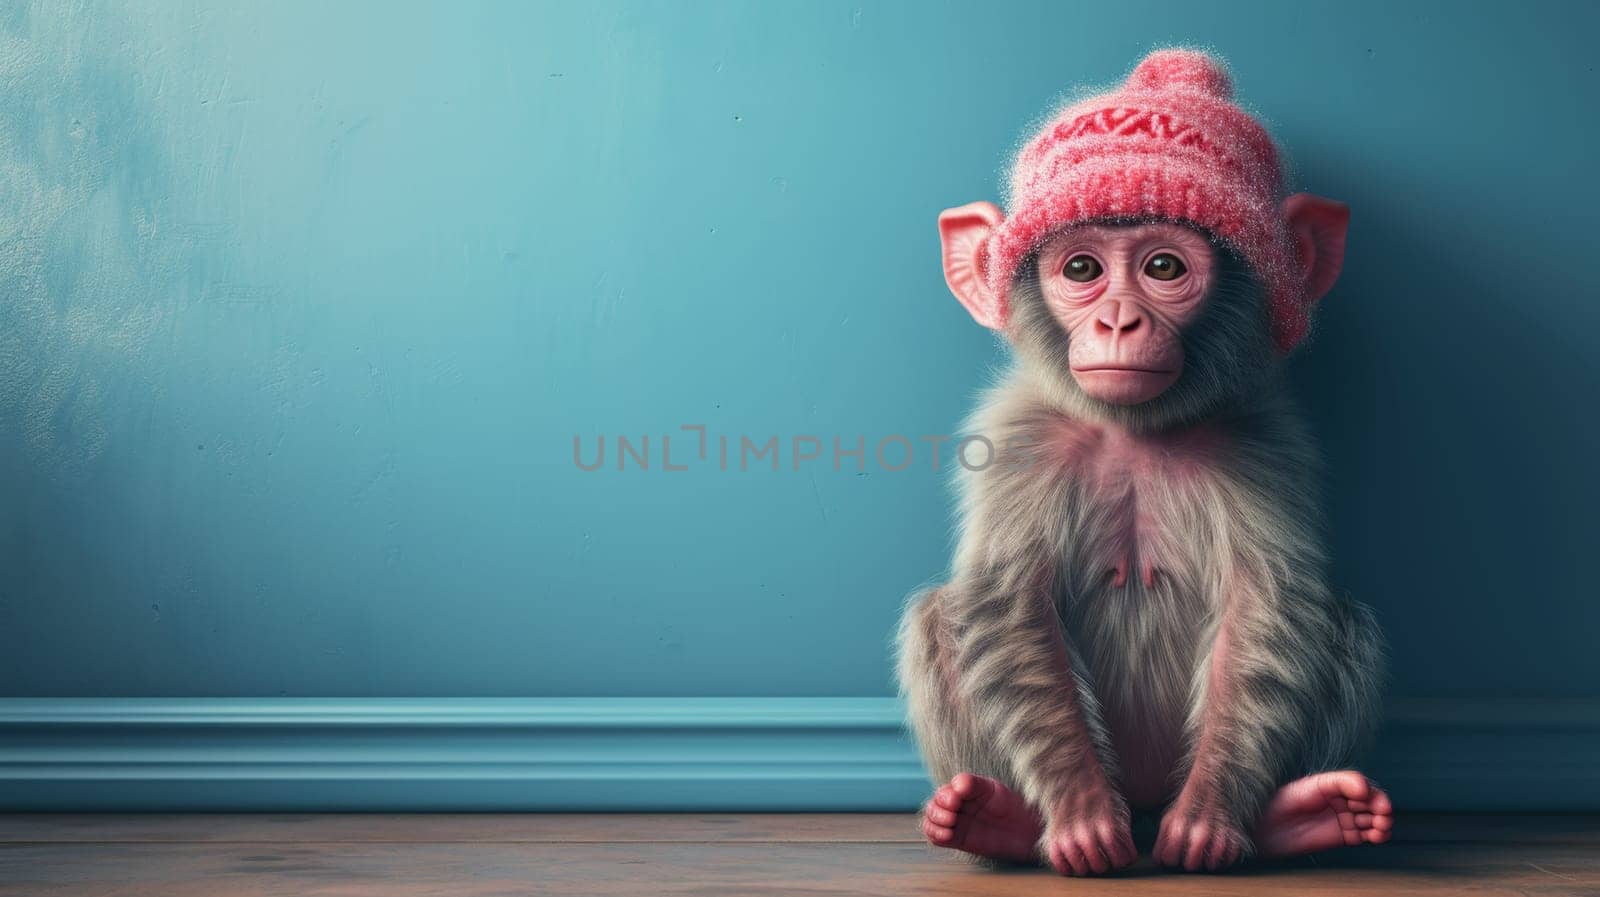 A pink monkey in a warm hat sitting in a blue interior.